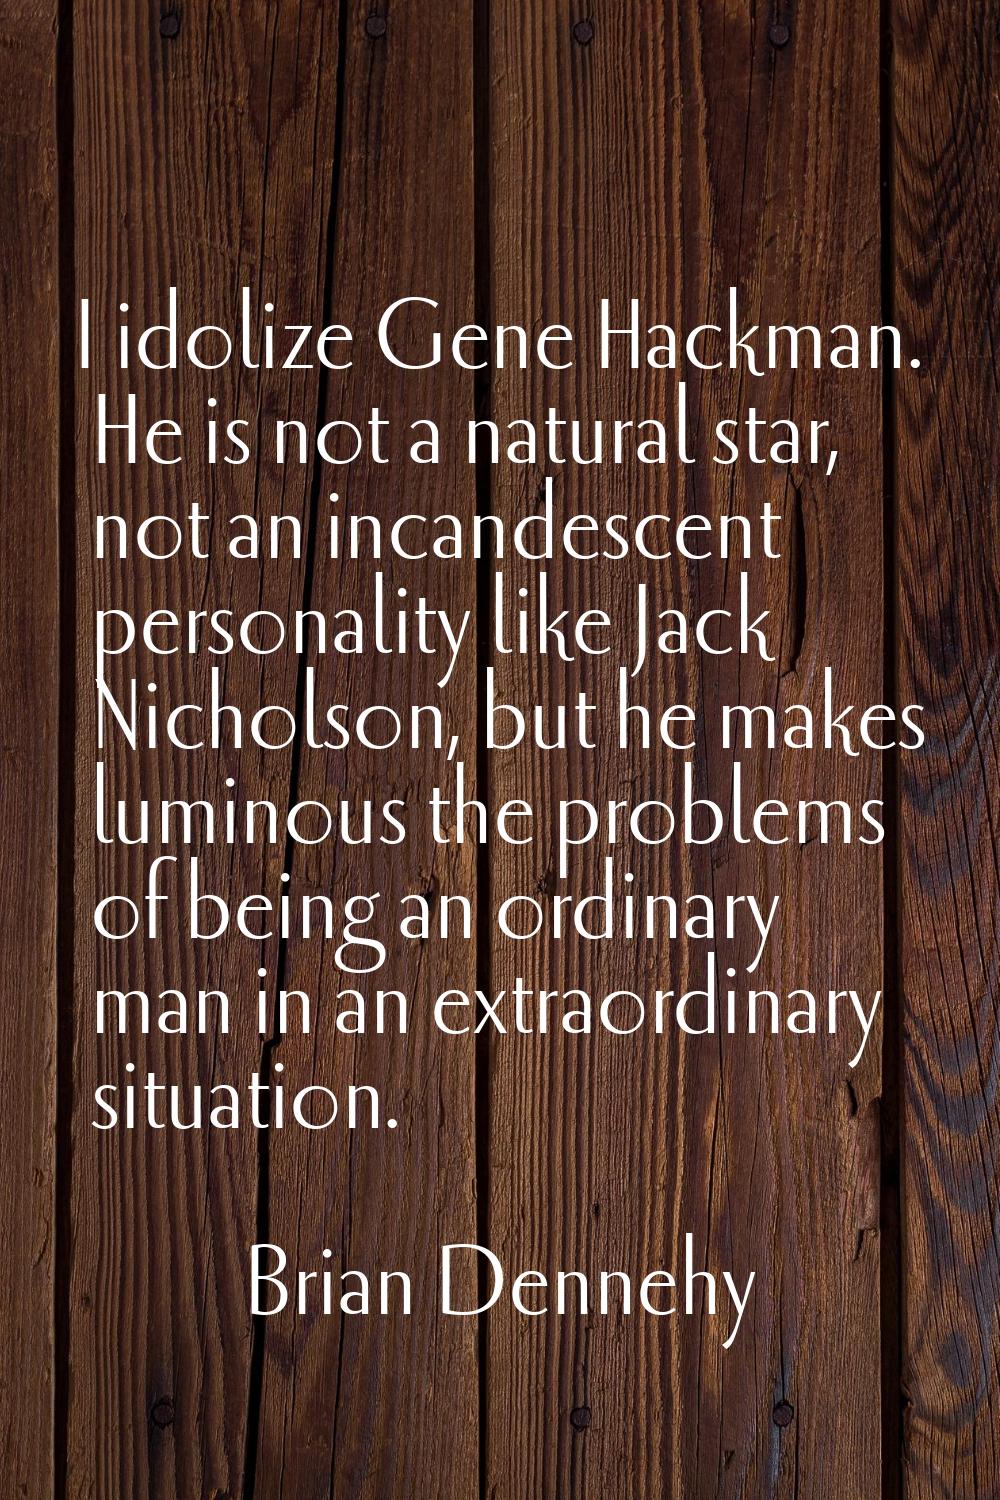 I idolize Gene Hackman. He is not a natural star, not an incandescent personality like Jack Nichols